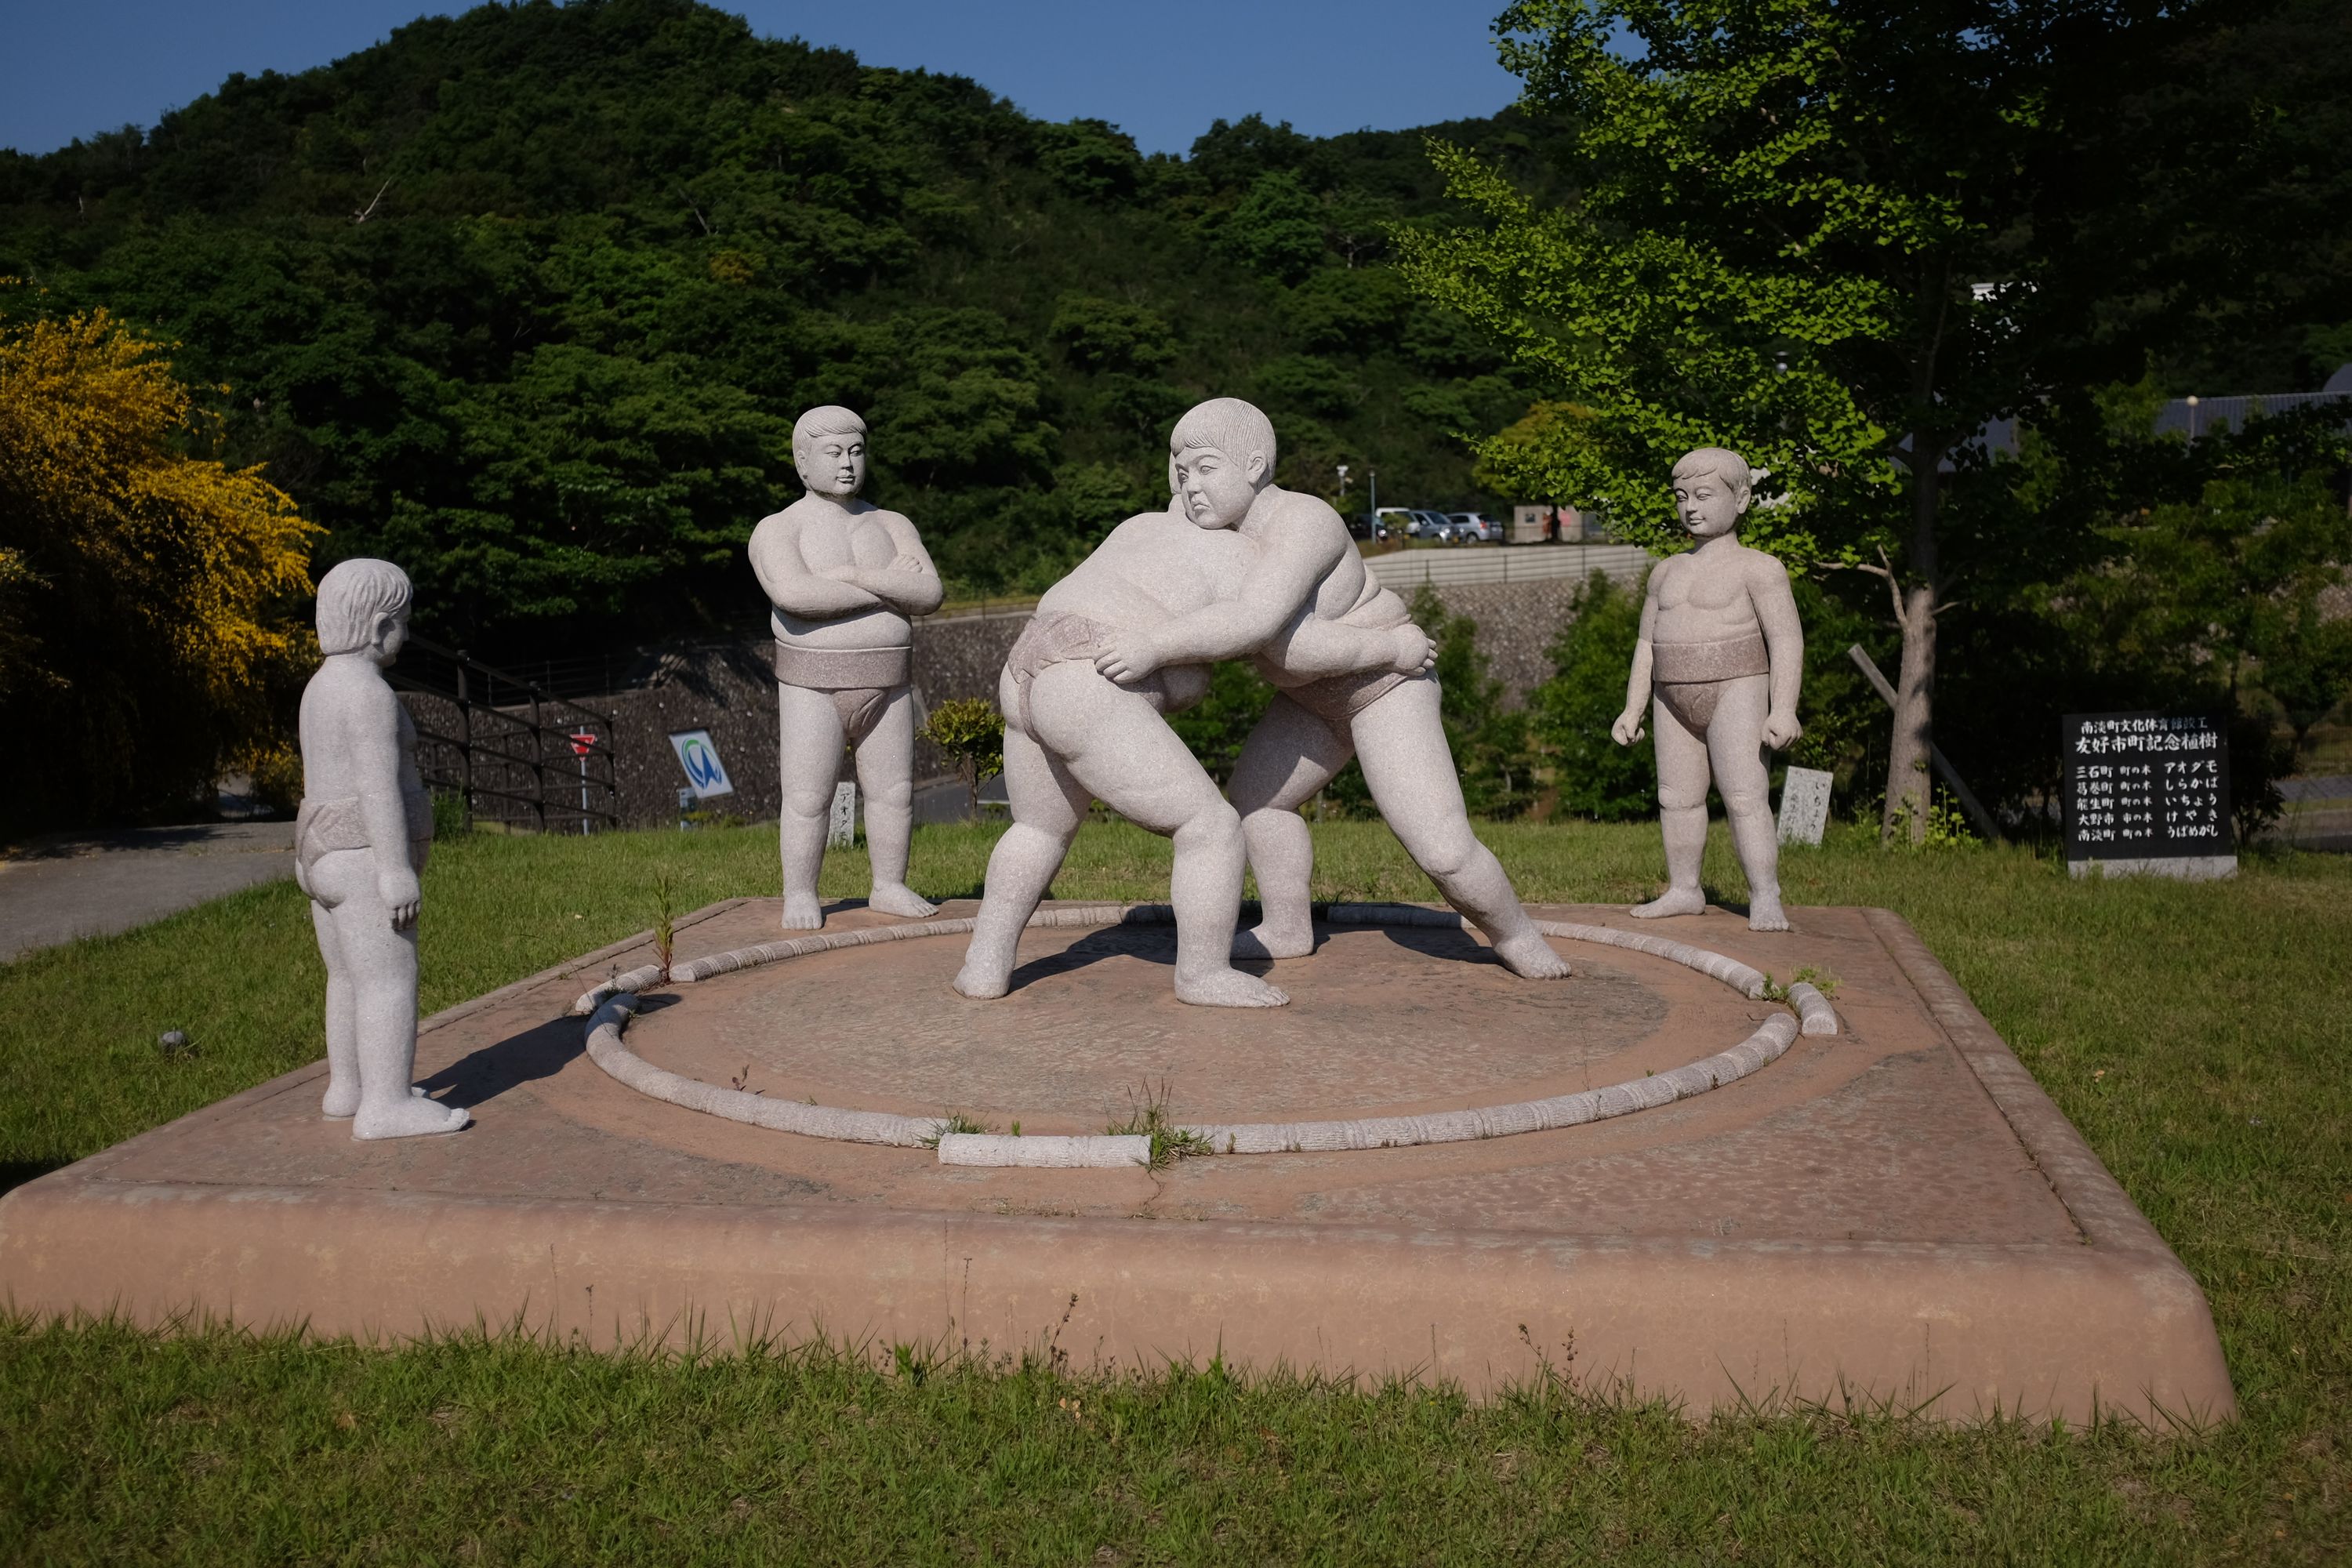 An open-air statue of five young sumo wrestlers: three watch while two wrestle.